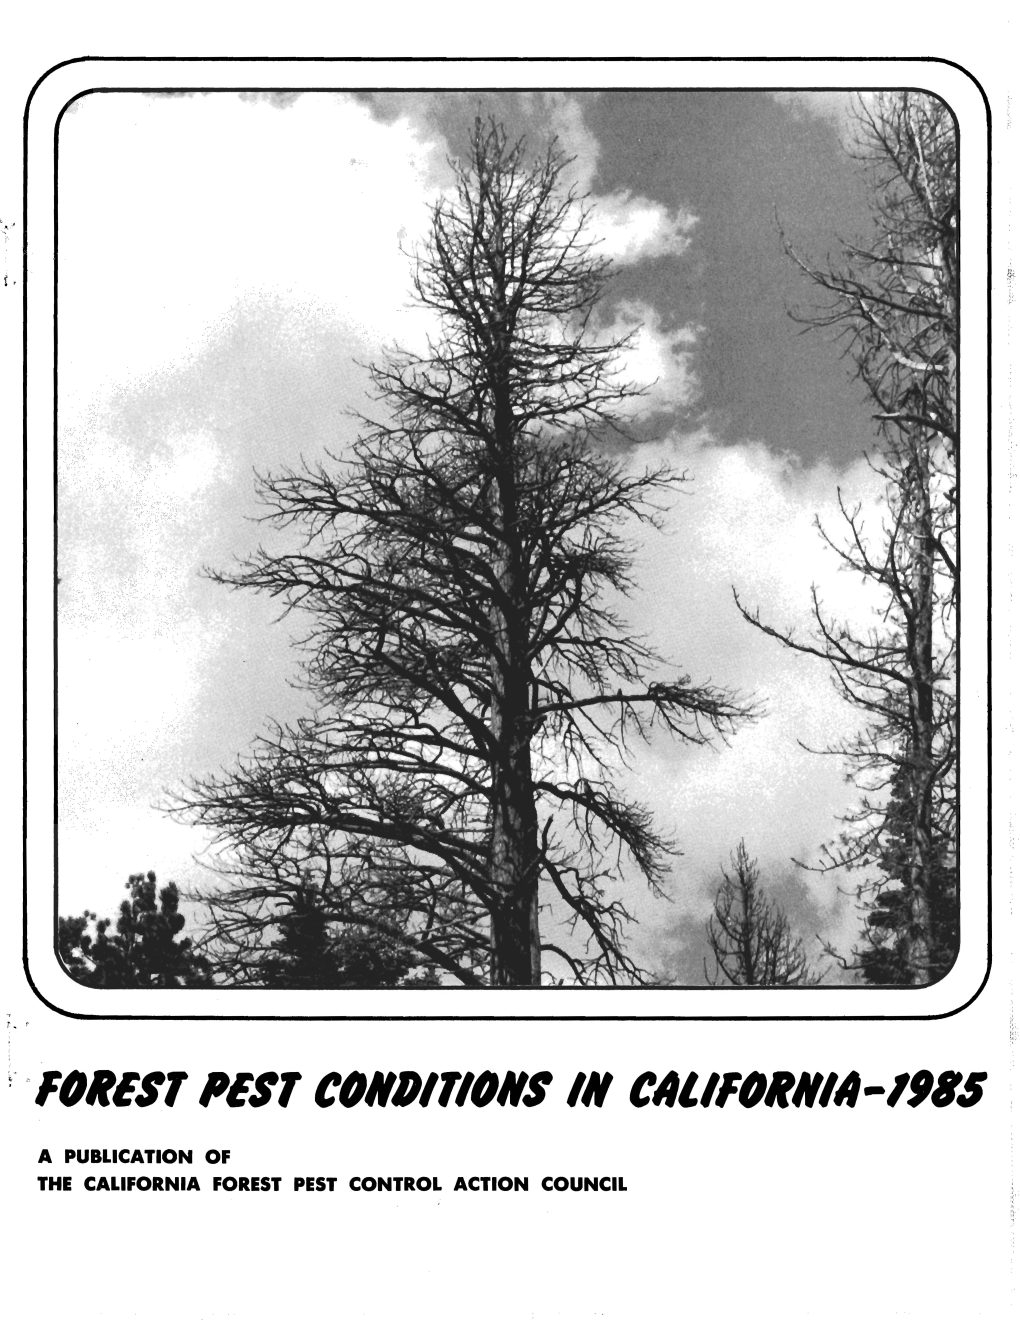 Forest Pest Conditions in California, 1985